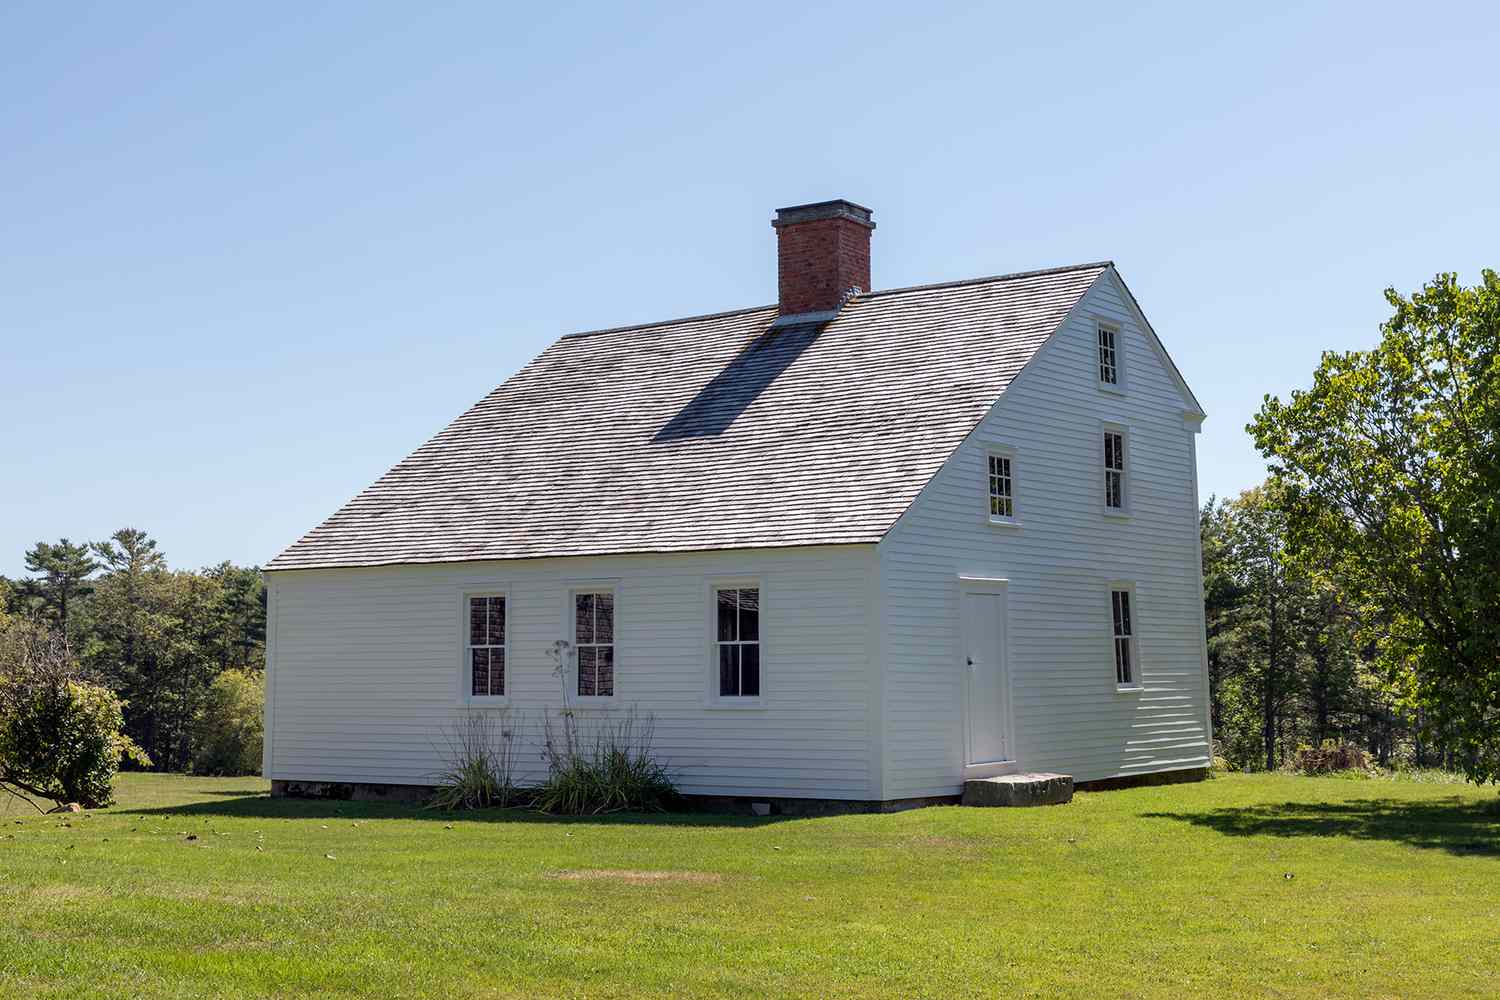 <p>frame houses with two stories in front and one in back, having a pitched roof with unequal sides, being short and high in front and long and low in back. The front of the house is flat and the rear roof line is steeply sloped.</p>